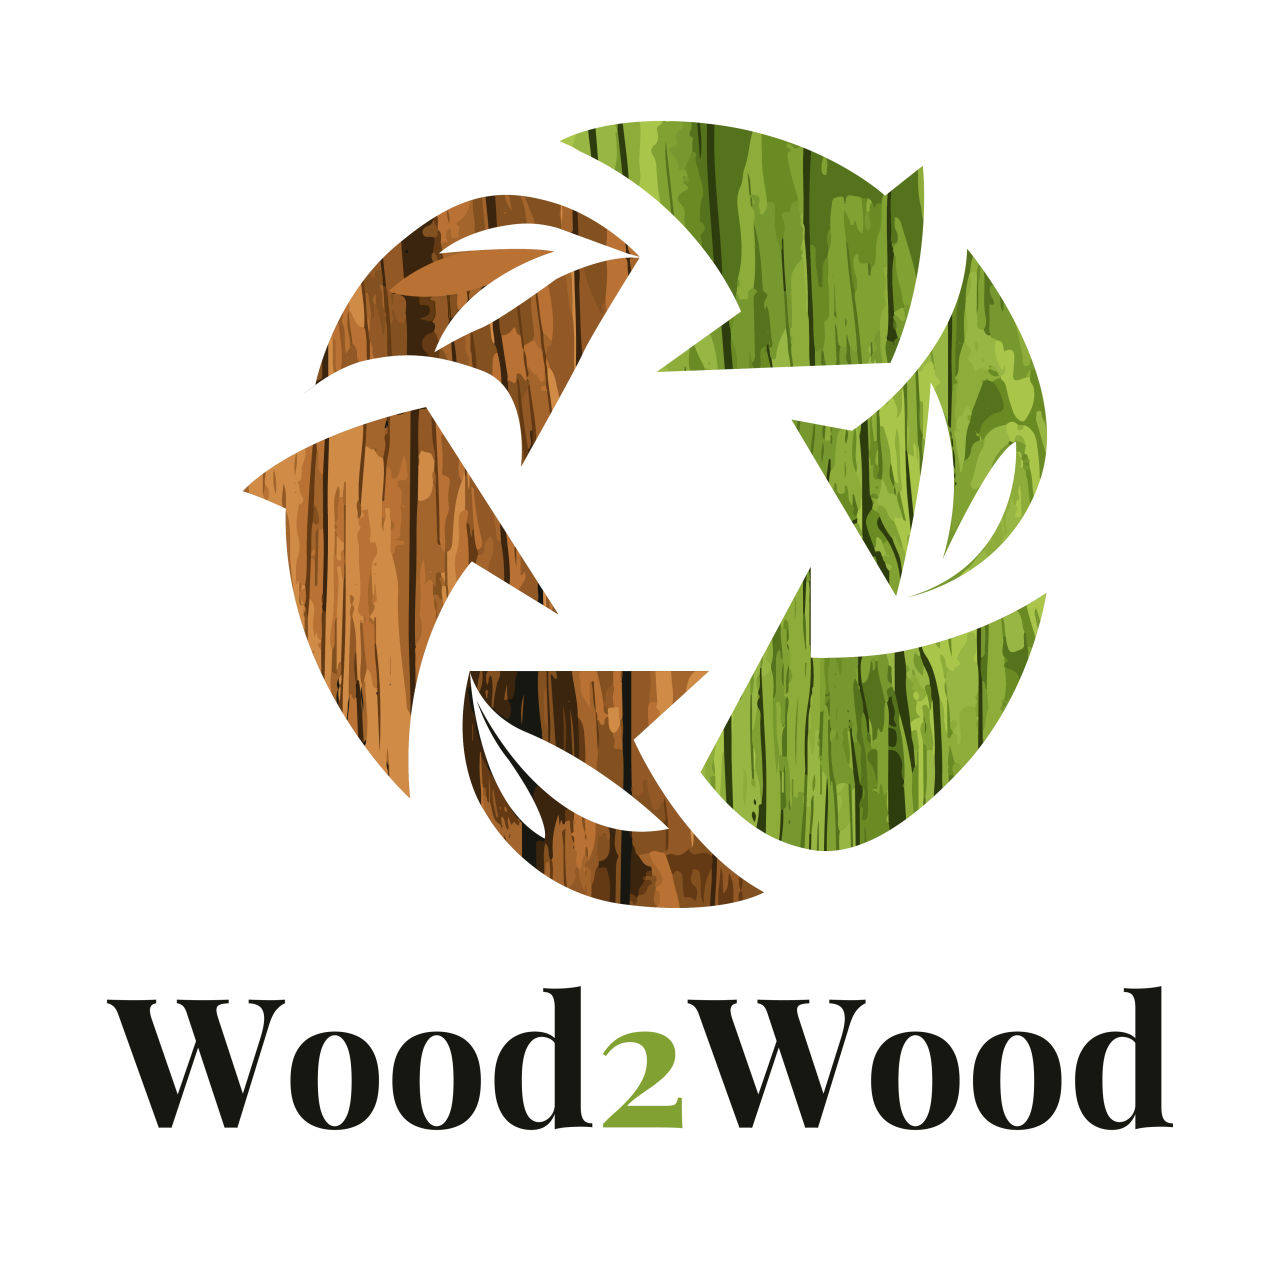 Introducing The Wood2wood Project, An Eu Project On Wood Value Chain 